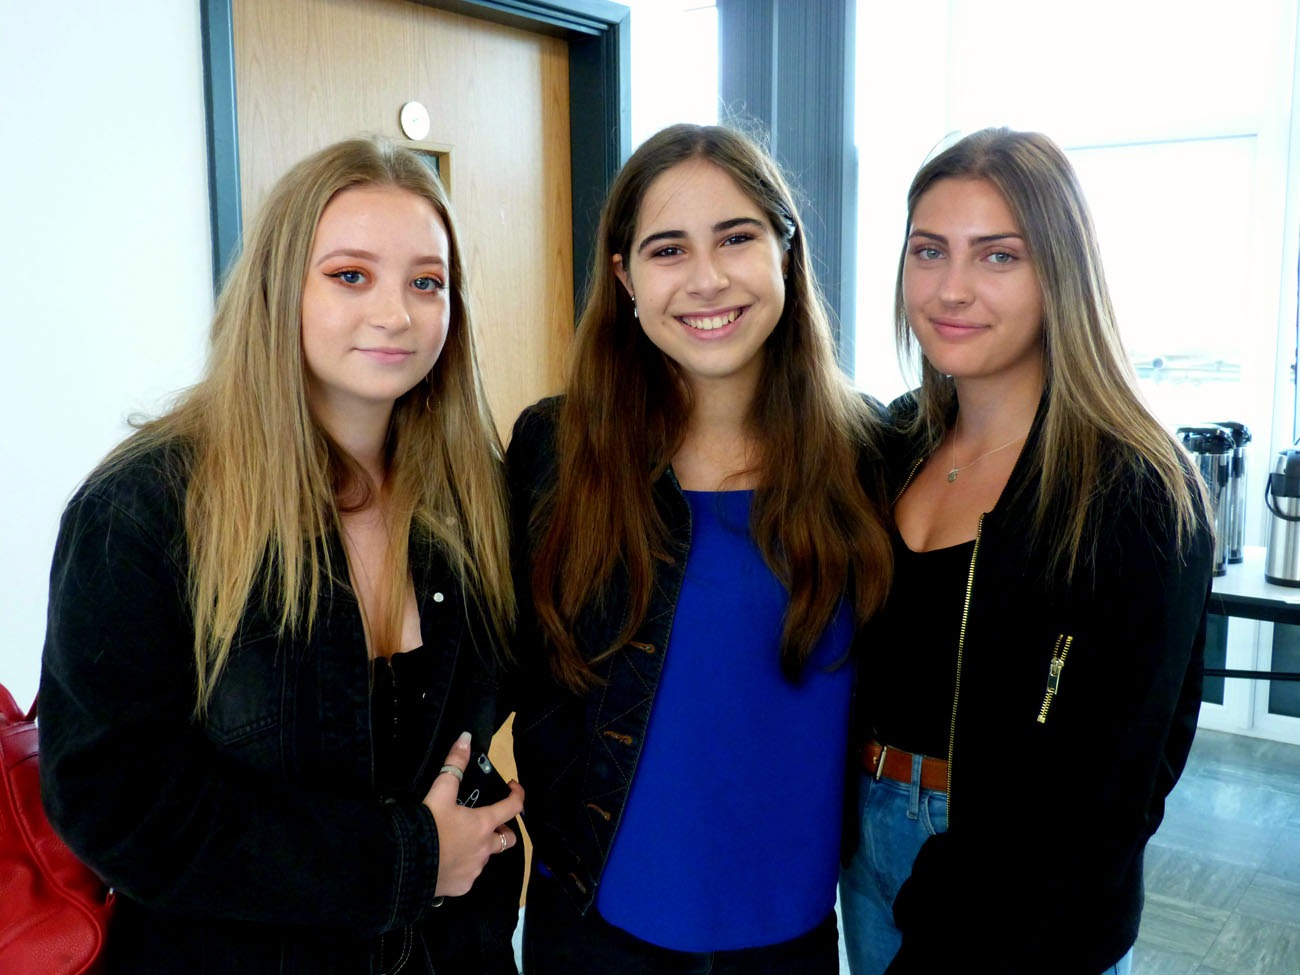 Hannah Woodhead, Olivia Caulfield and Ella Harris all achieved the grades they need to study their chosen A level subjects at Rossett School's Sixth Form